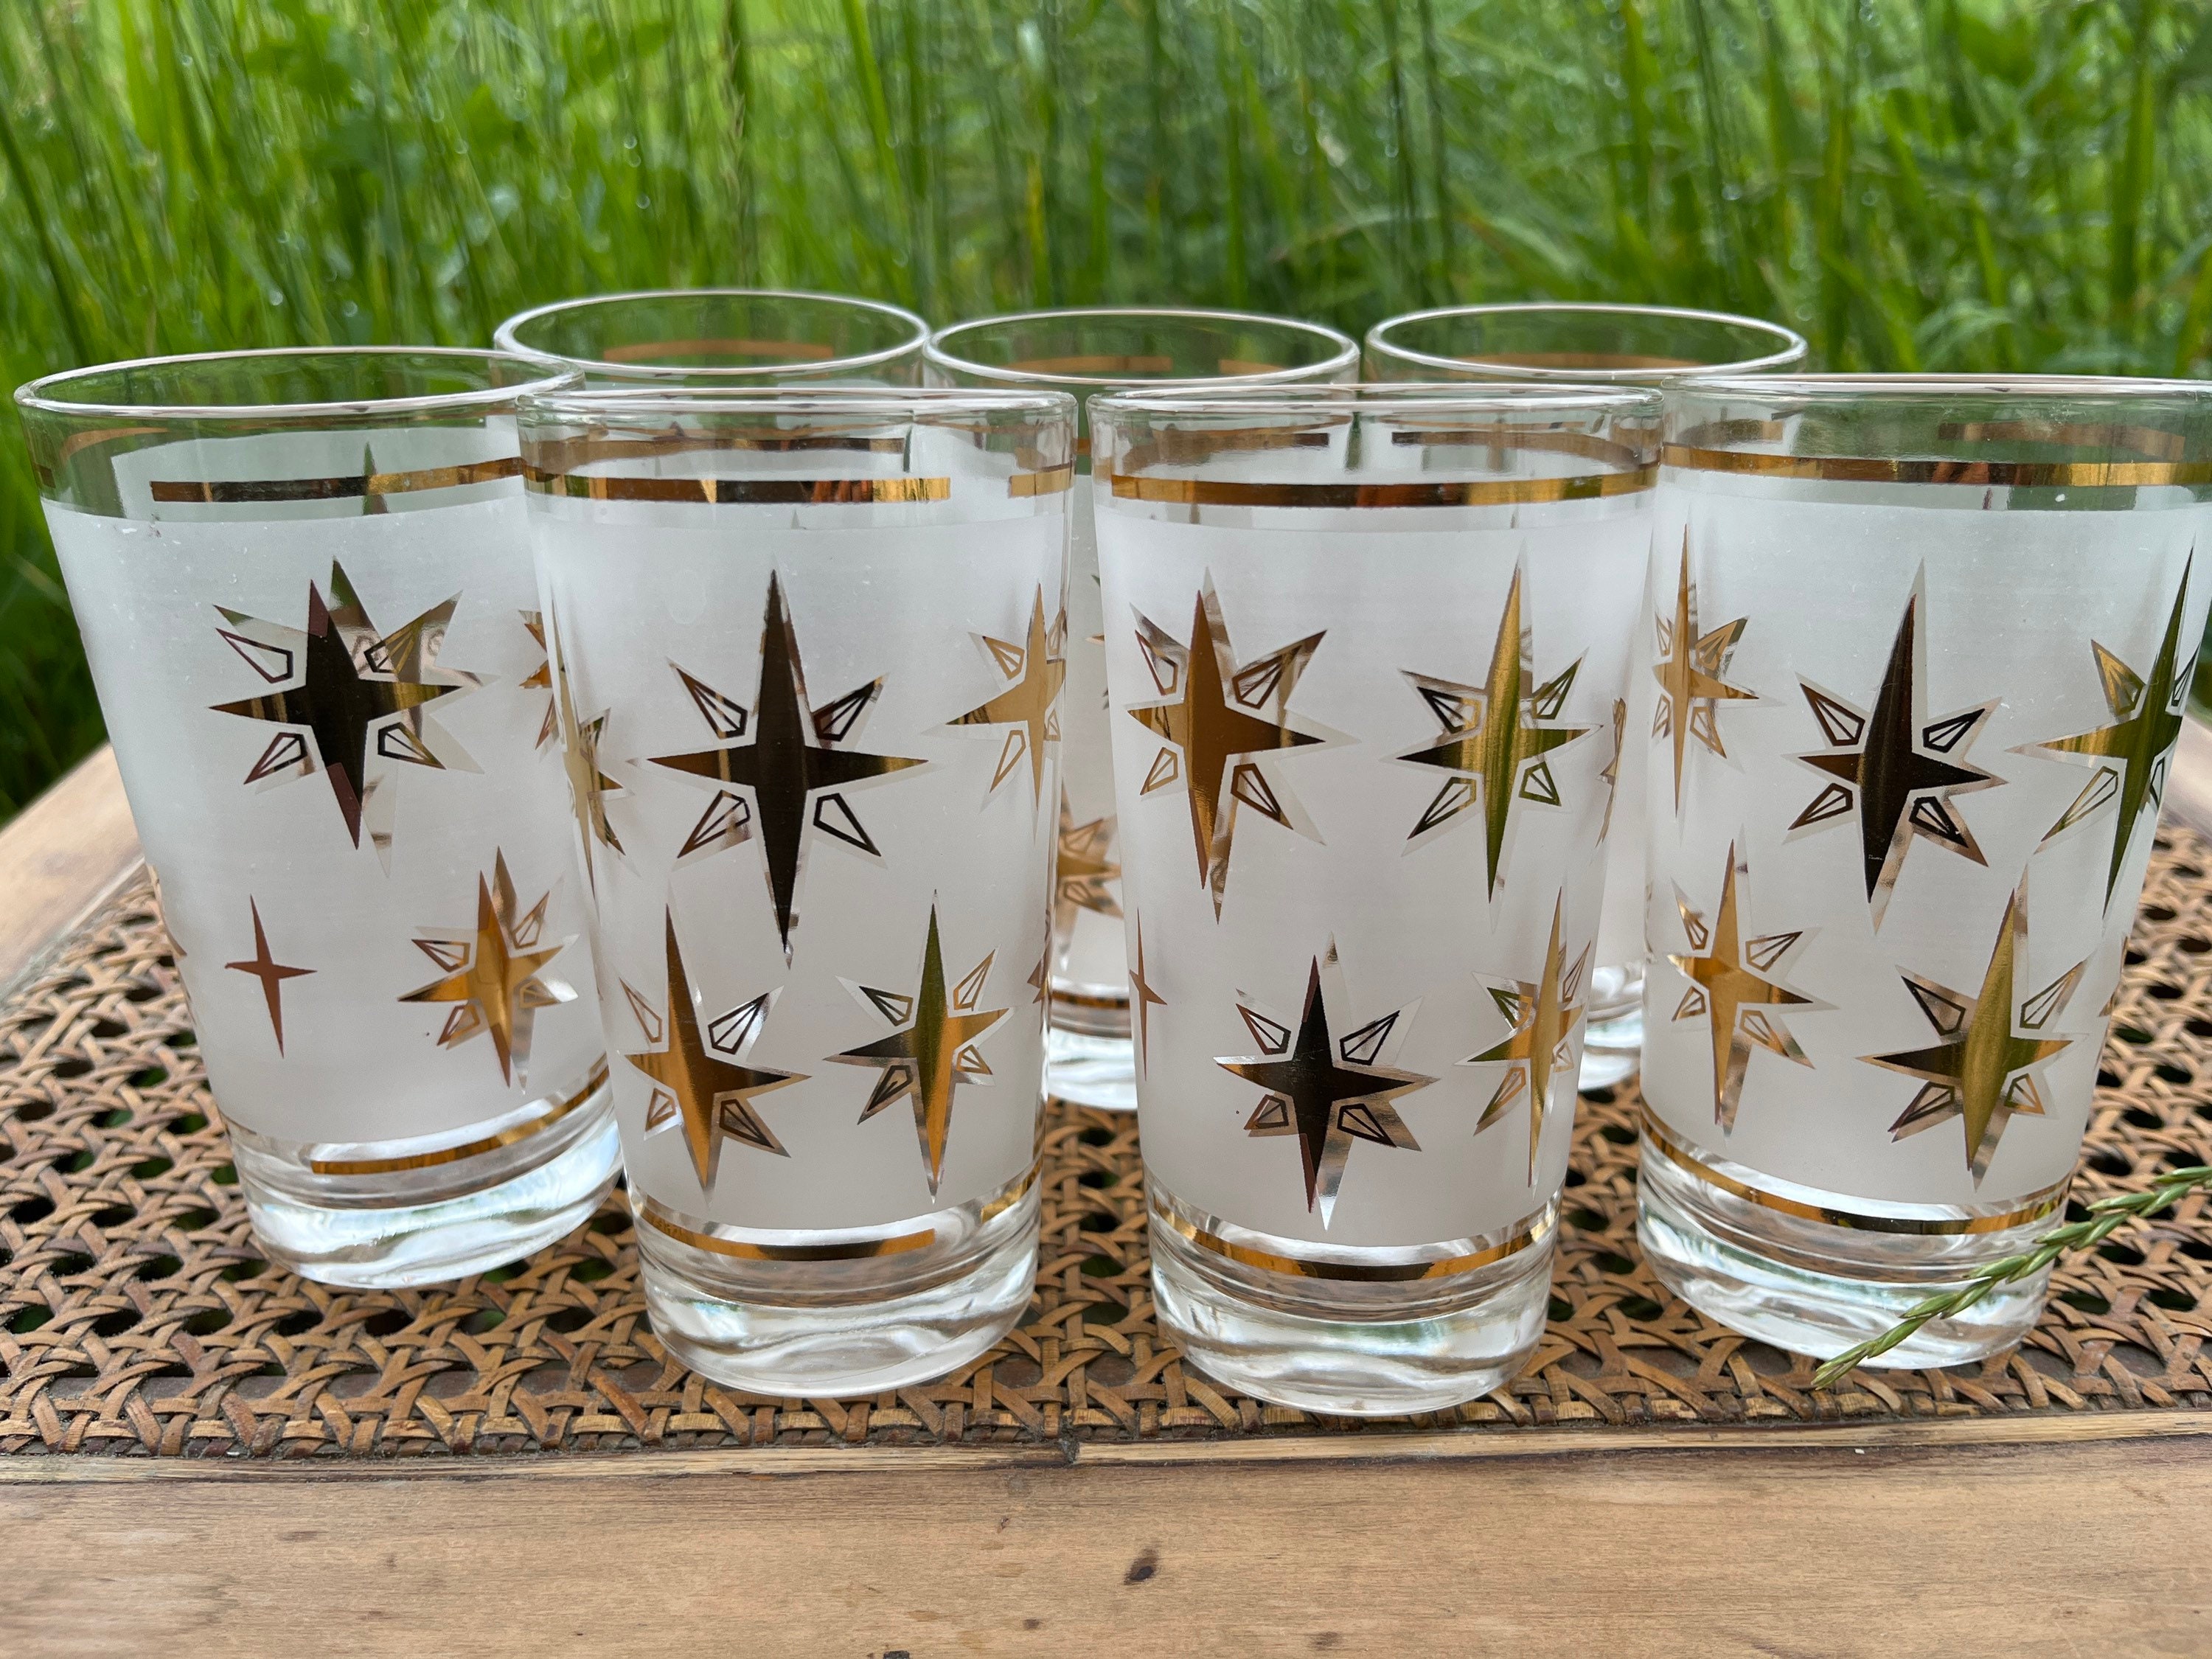 Vintage Libbey Glassware Marine Life Cocktail Glasses in the Atomic Style  at 1stDibs